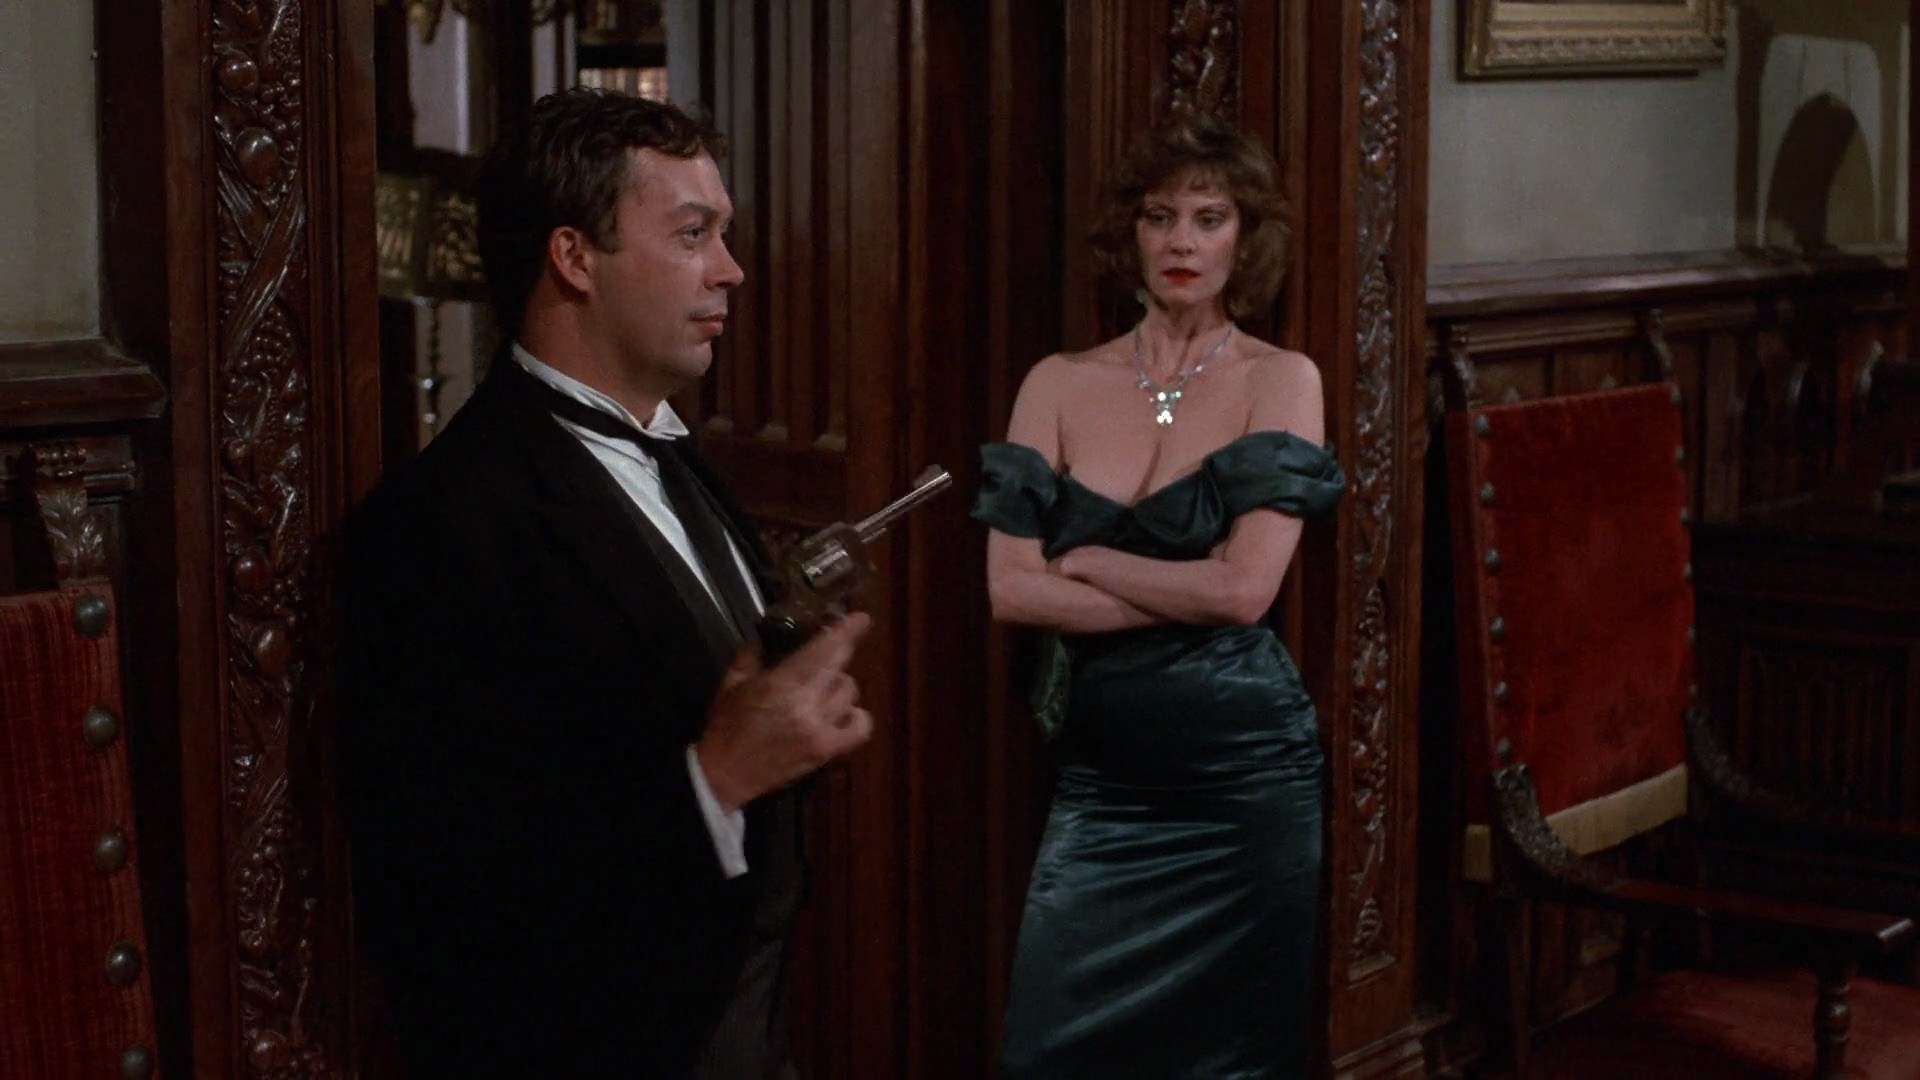 Tim Curry holding a gun while Lesley Ann Warren looks disapproving in this image from The Guber-Peters Company.